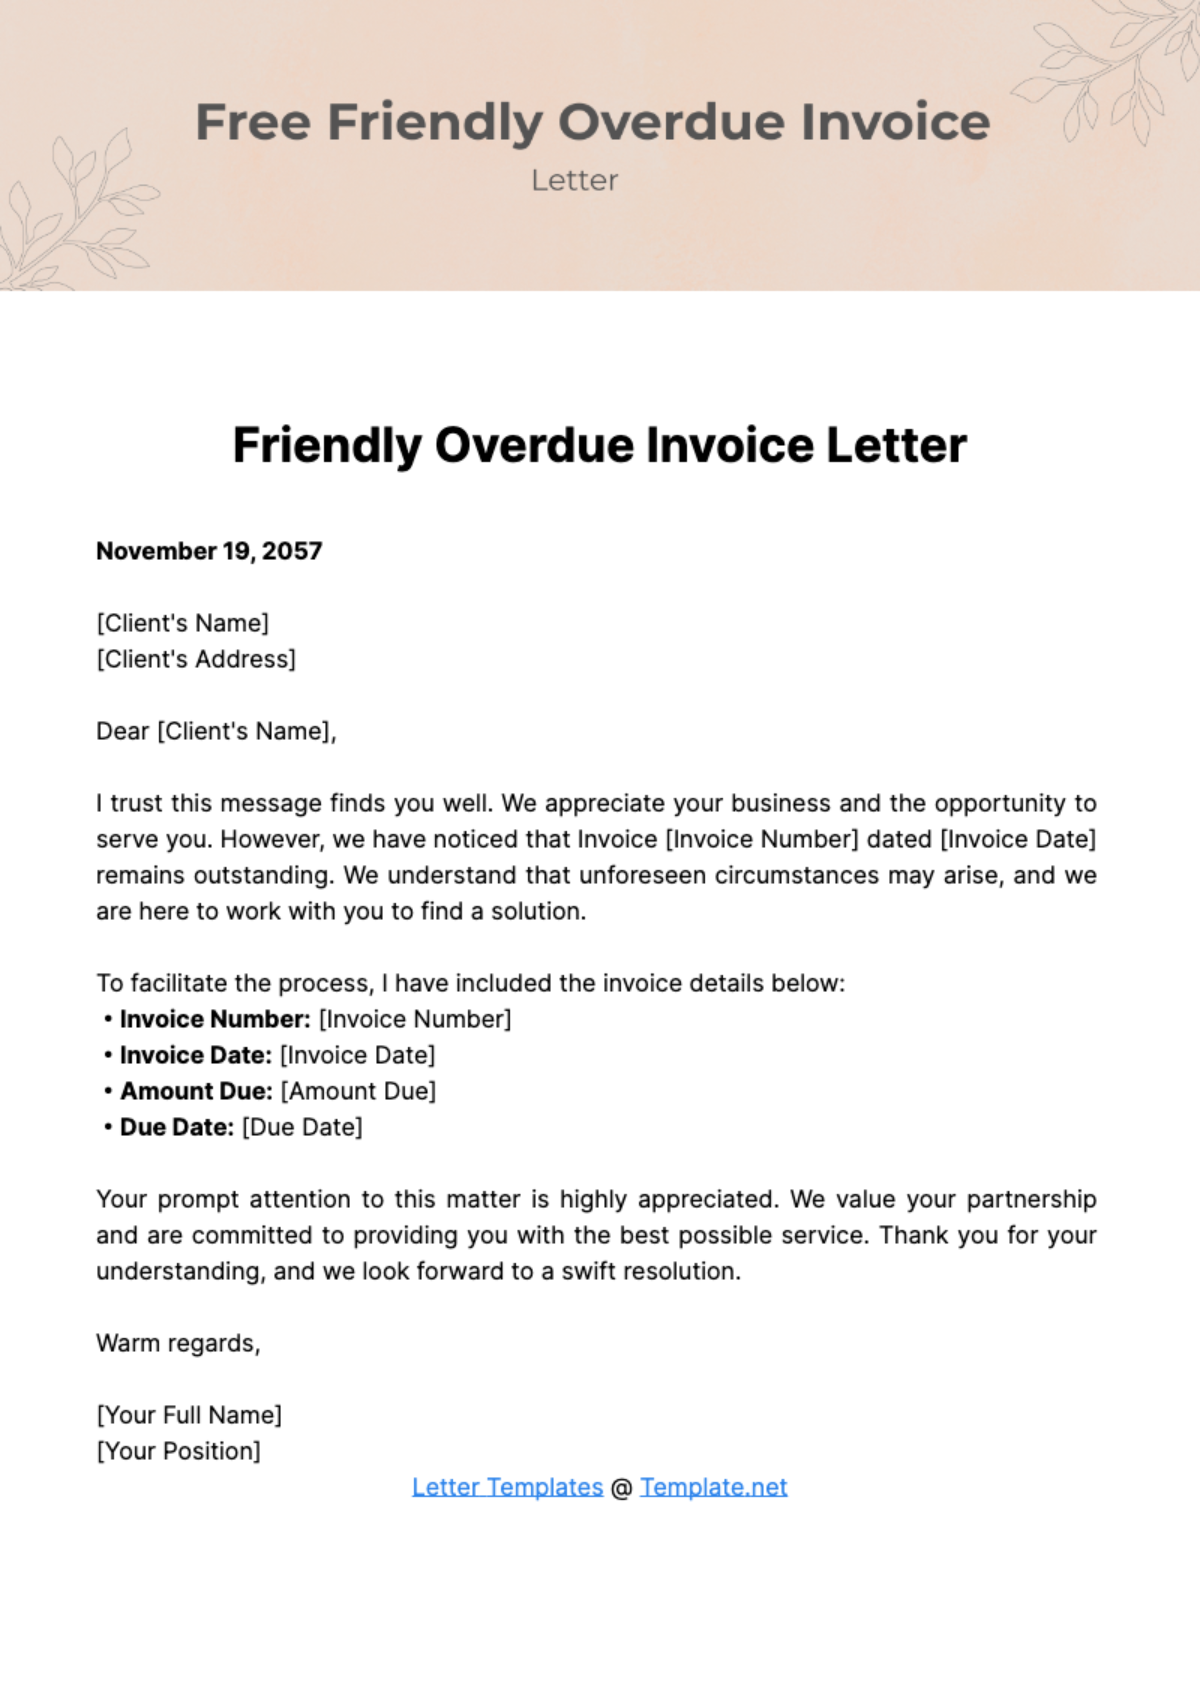 Free Friendly Overdue Invoice Letter Template